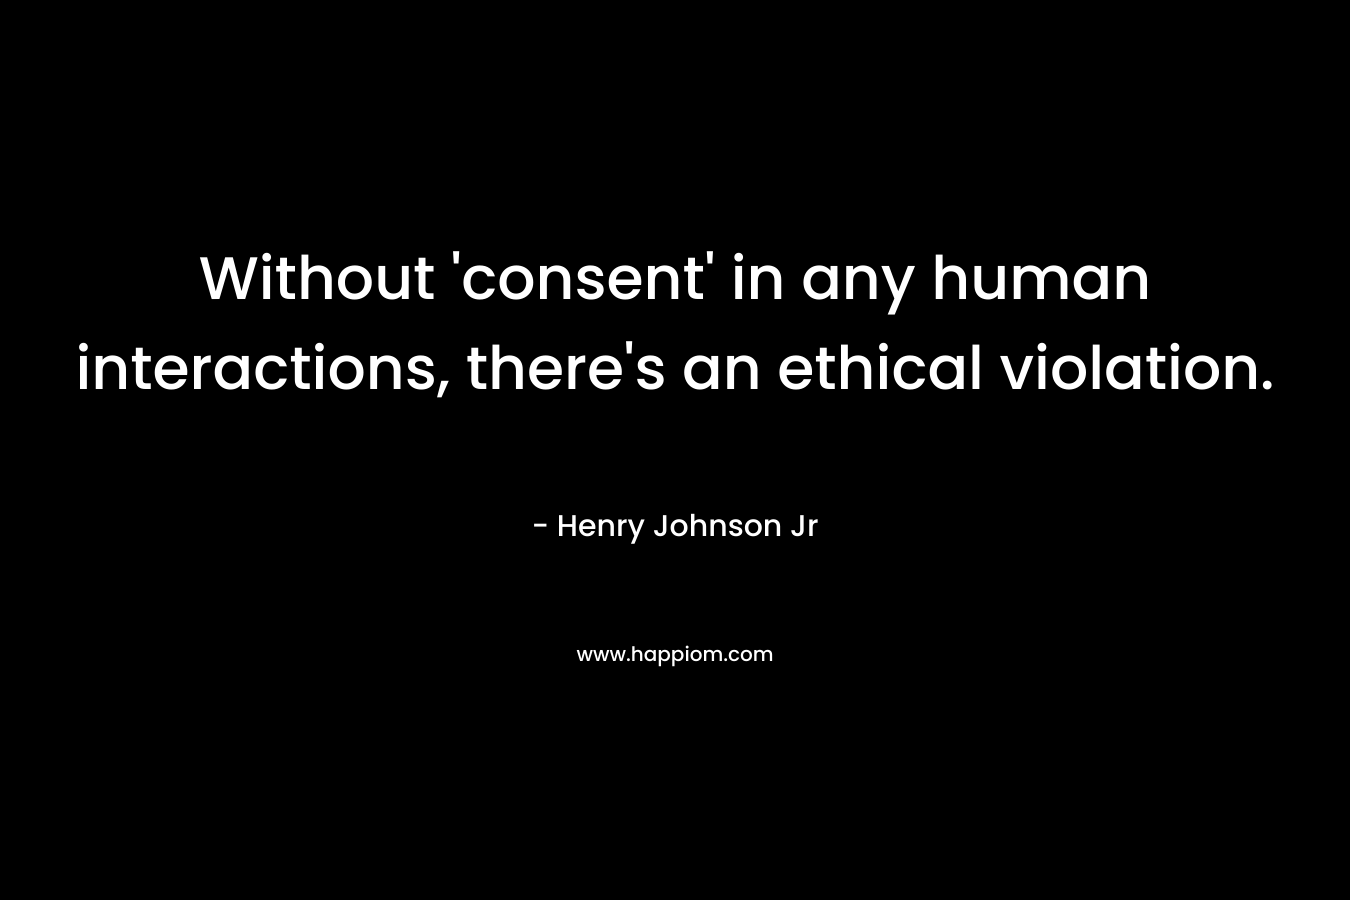 Without 'consent' in any human interactions, there's an ethical violation.